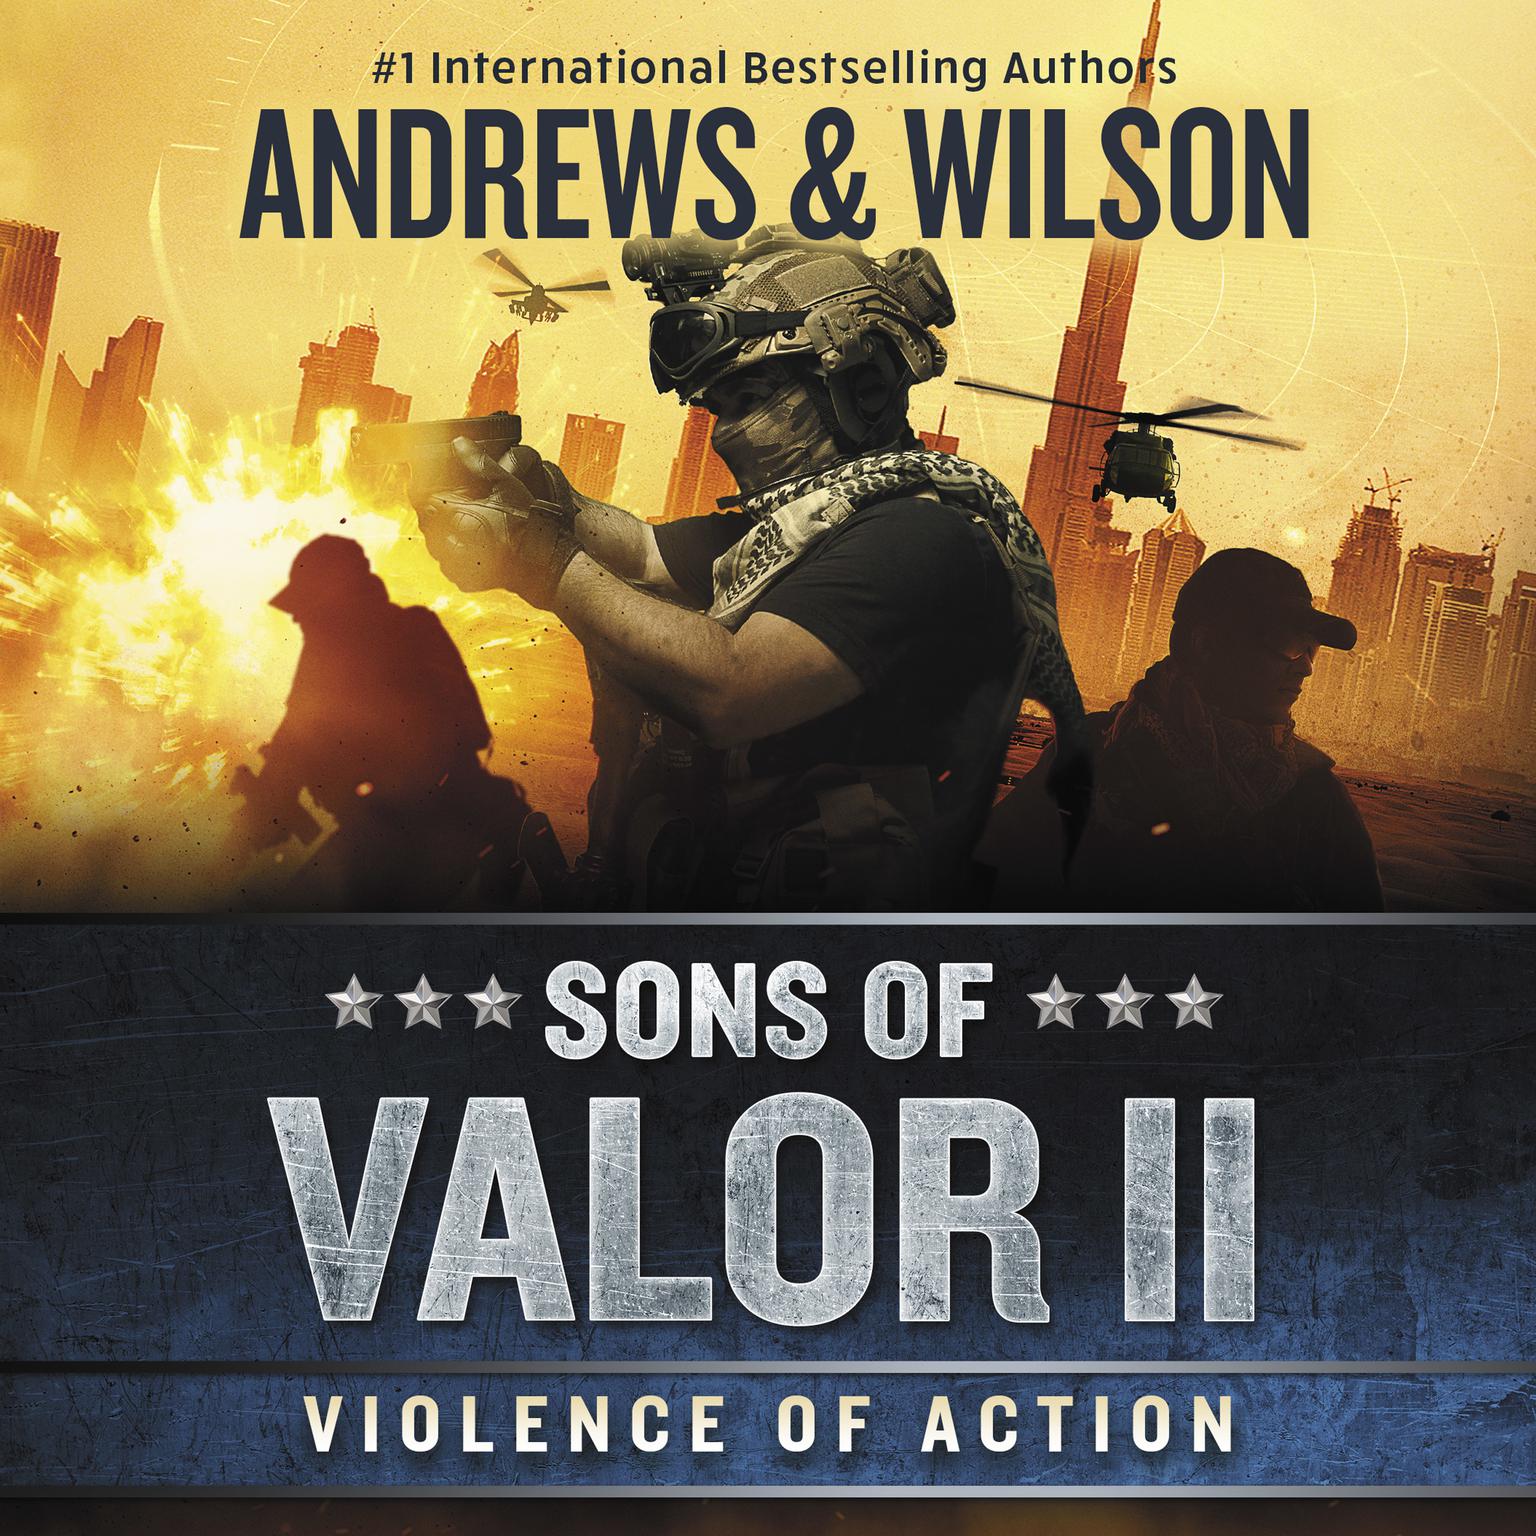 Sons of Valor II: Violence of Action Audiobook, by Brian Andrews